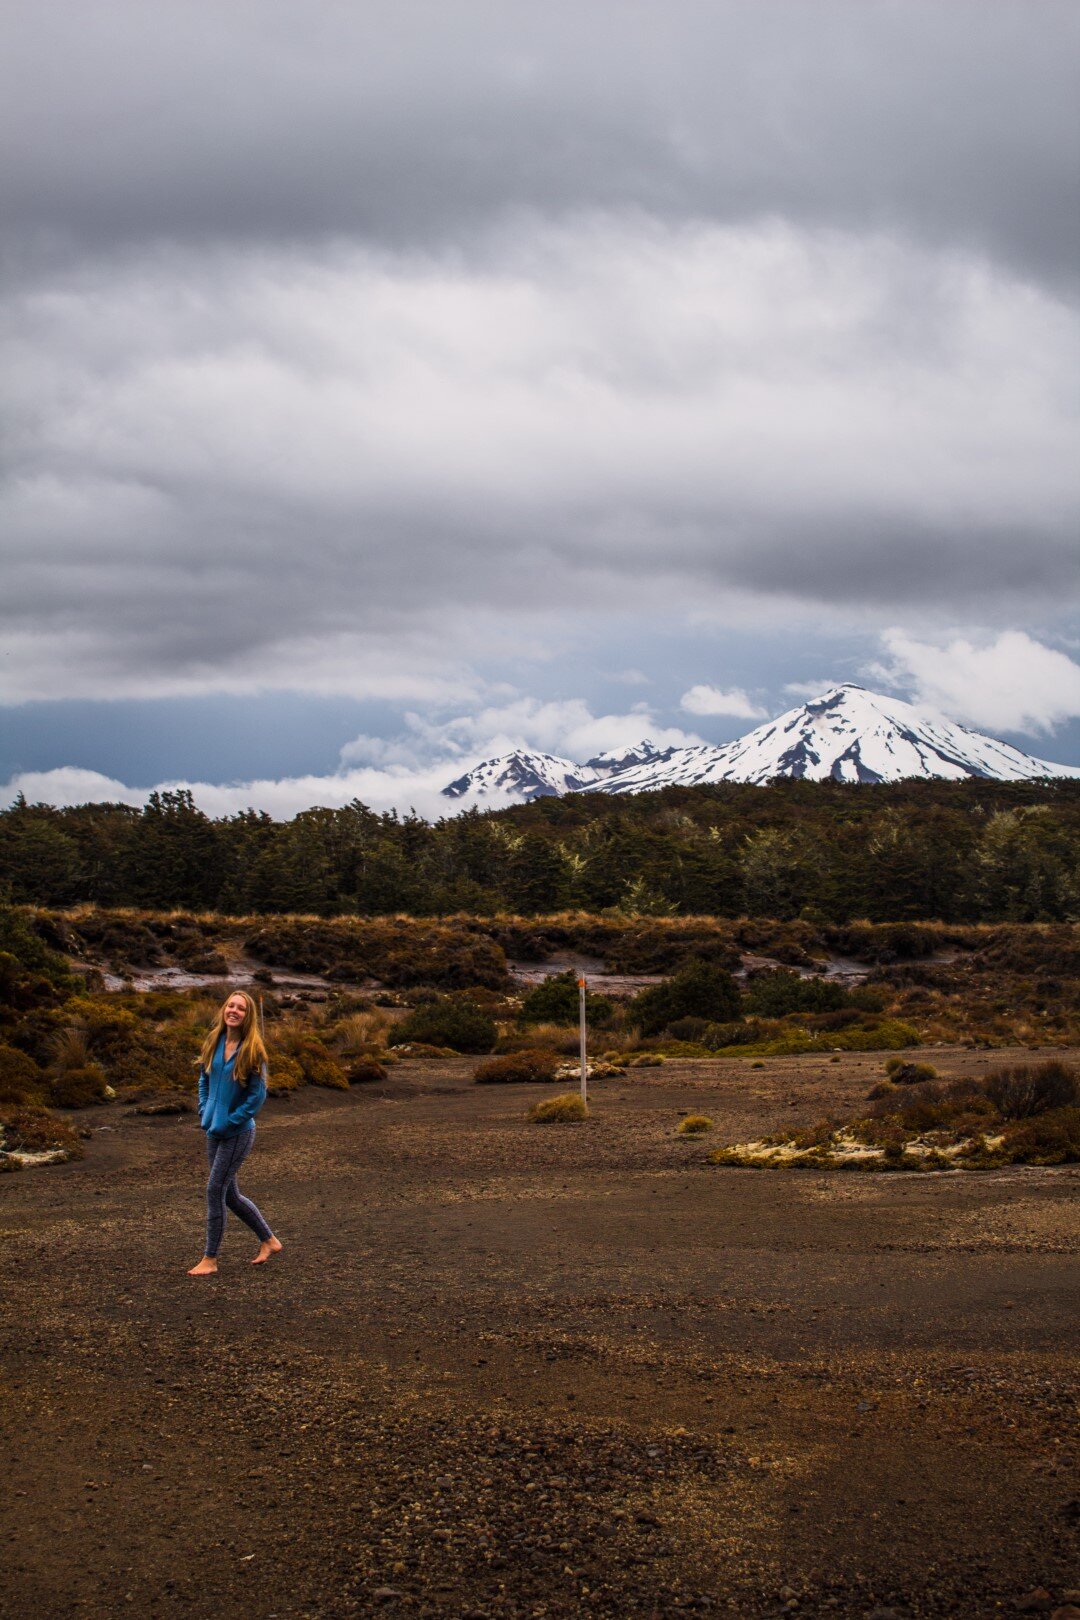 Day 2: Side-trip to Ohinopango Springs with Mount Ngauruhoe in view